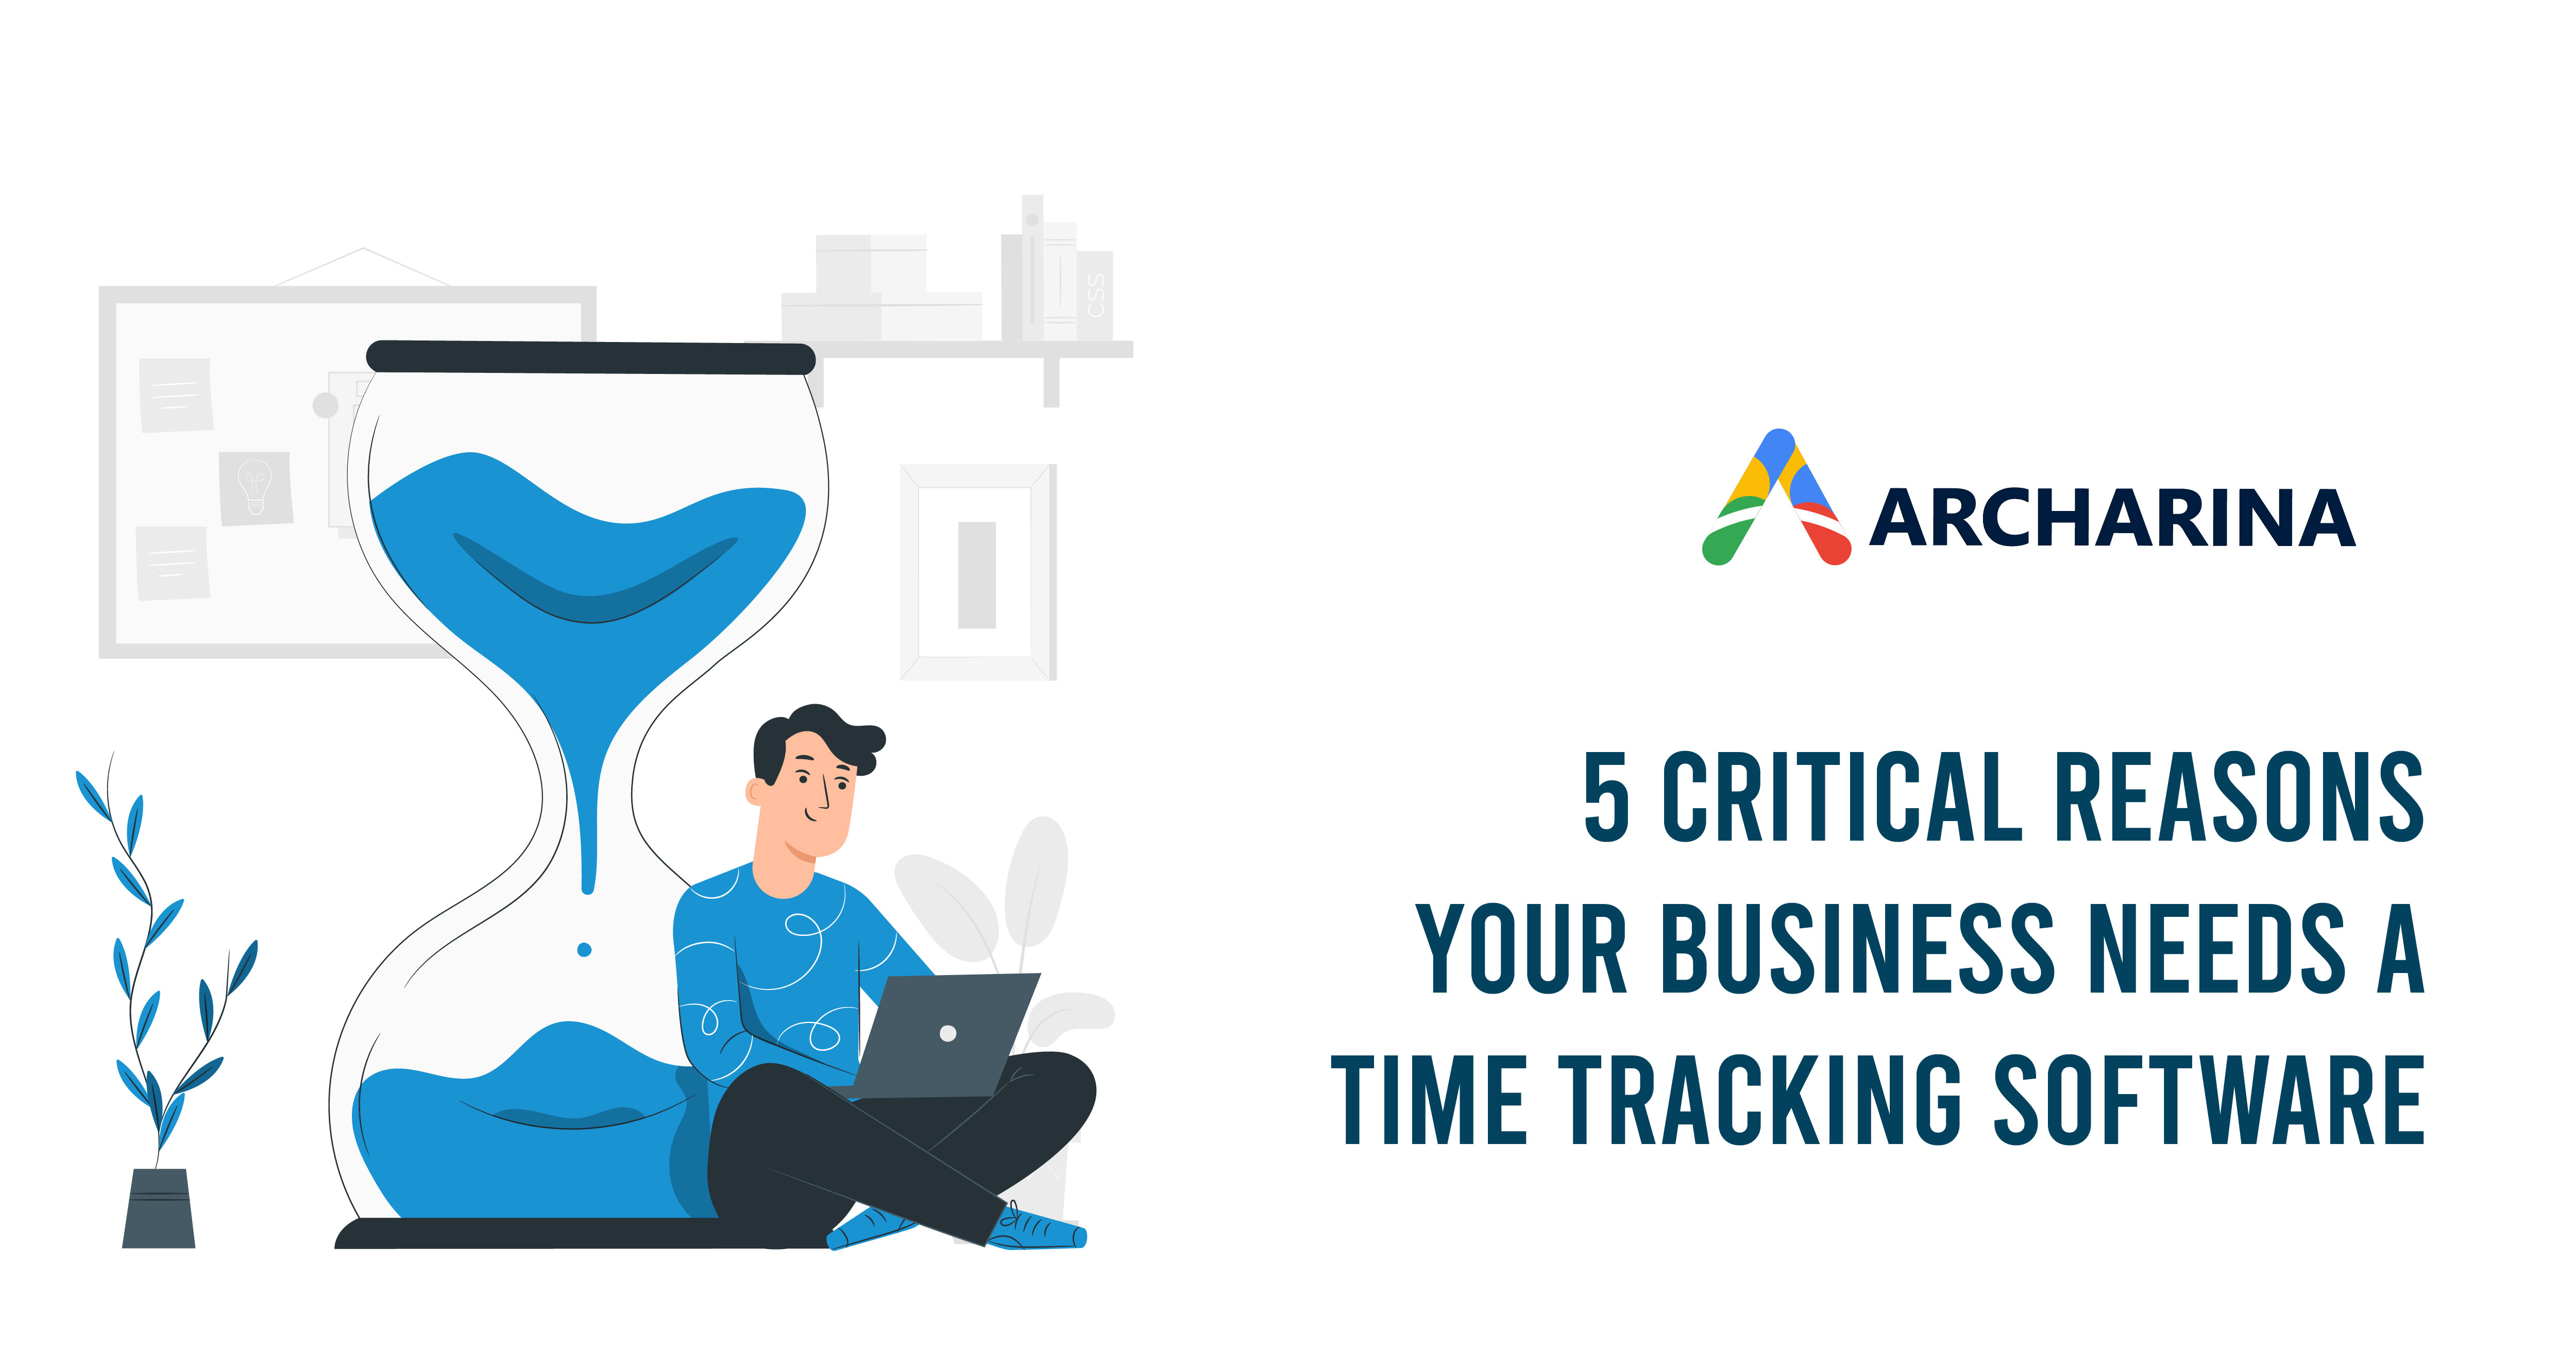 5 Critical Reasons Your Business Needs a Time Tracking Software